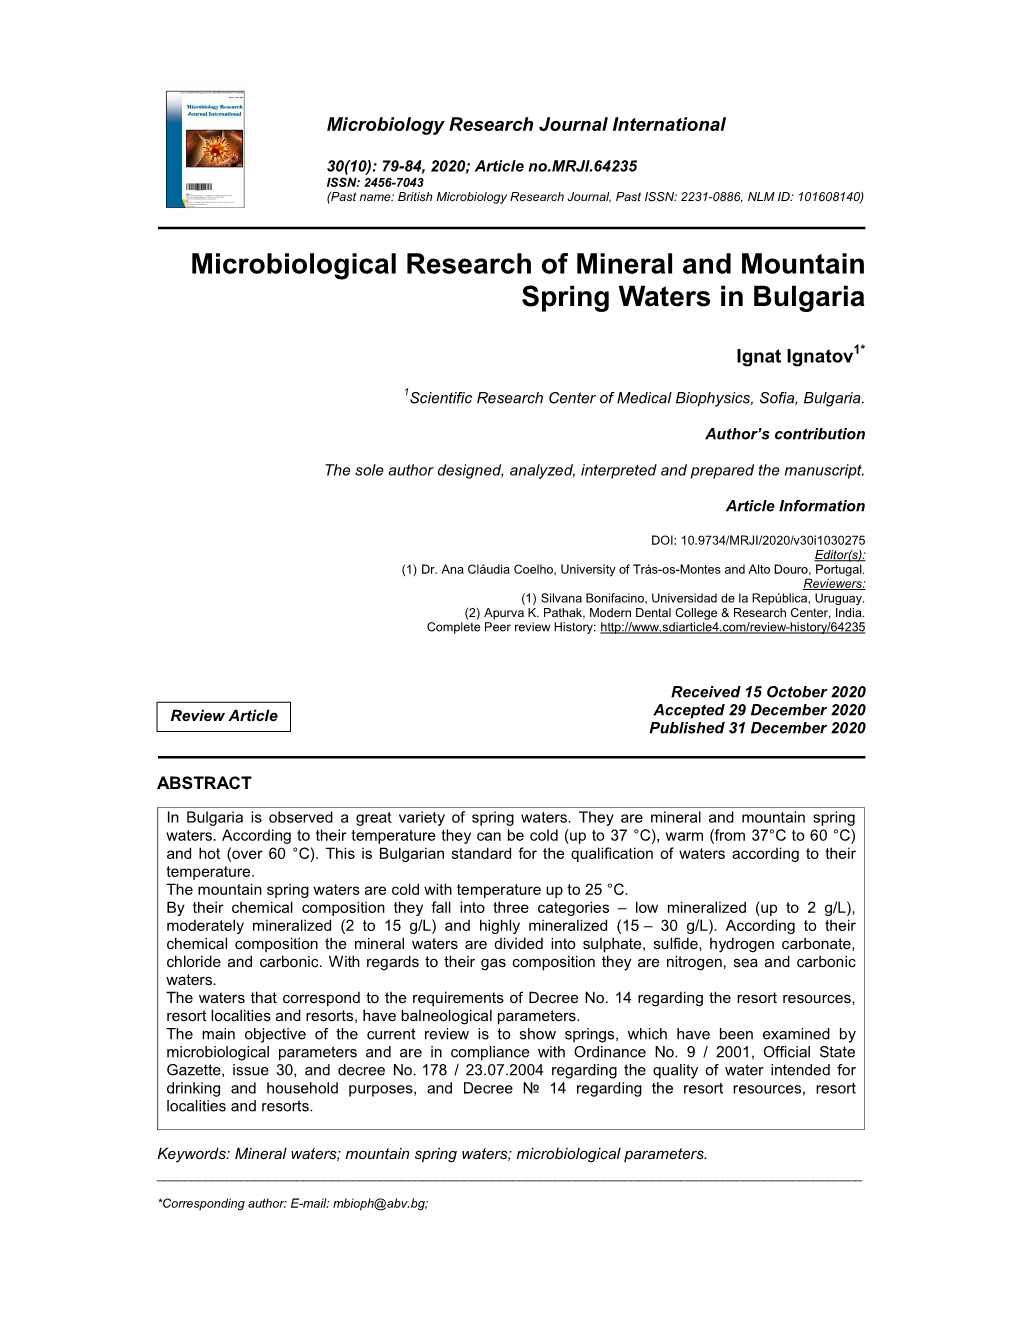 Microbiological Research of Mineral and Mountain Spring Waters in Bulgaria